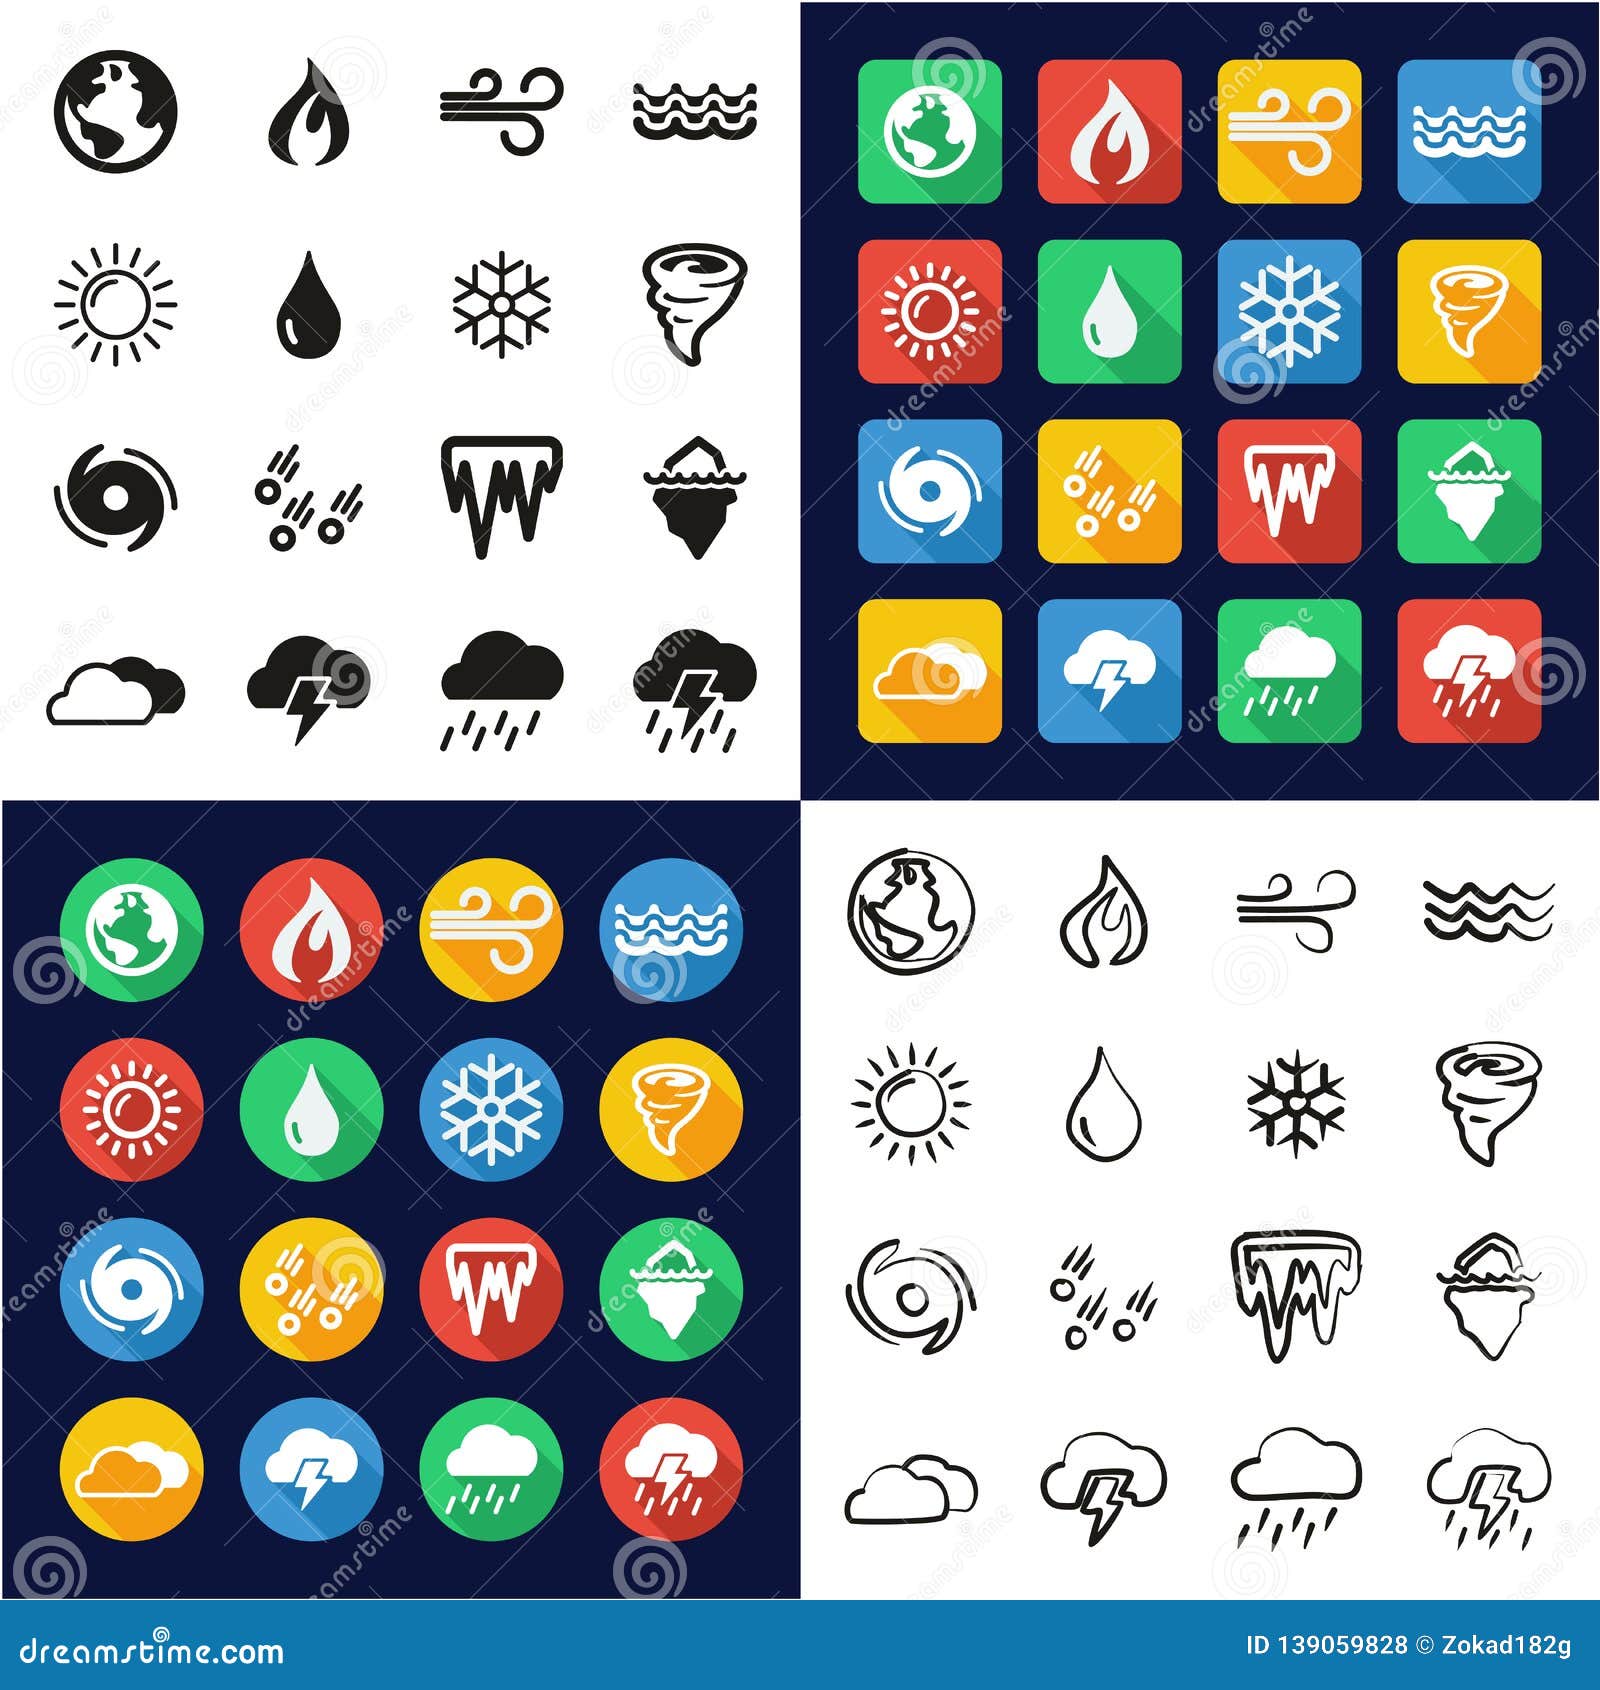 Nature Elements Icons All in One Icons Black Stock Vector